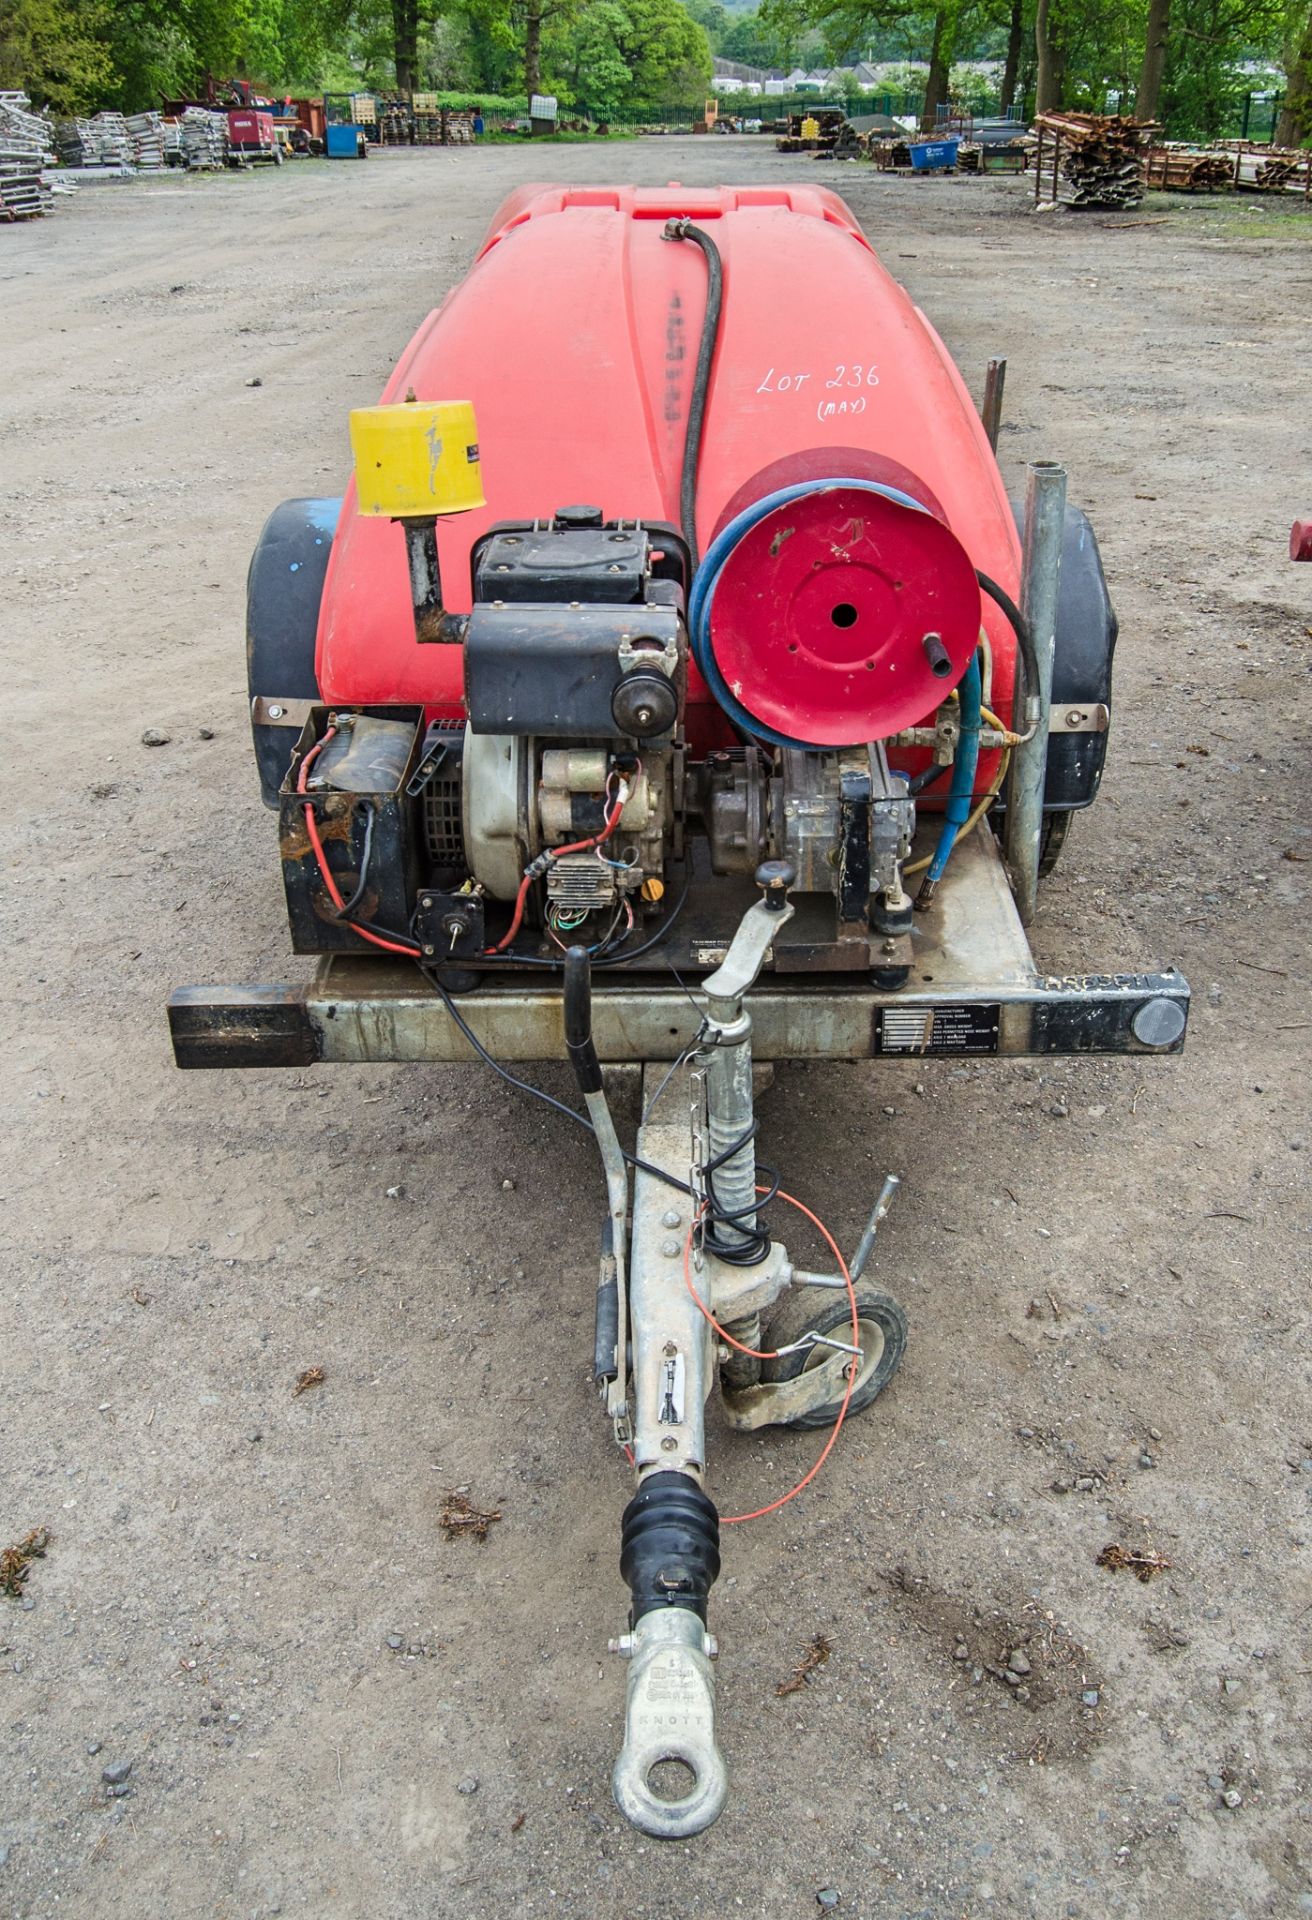 Western/Taskman diesel driven fast tow mobile pressure washer bowser ** No lance ** A985811 - Image 5 of 7